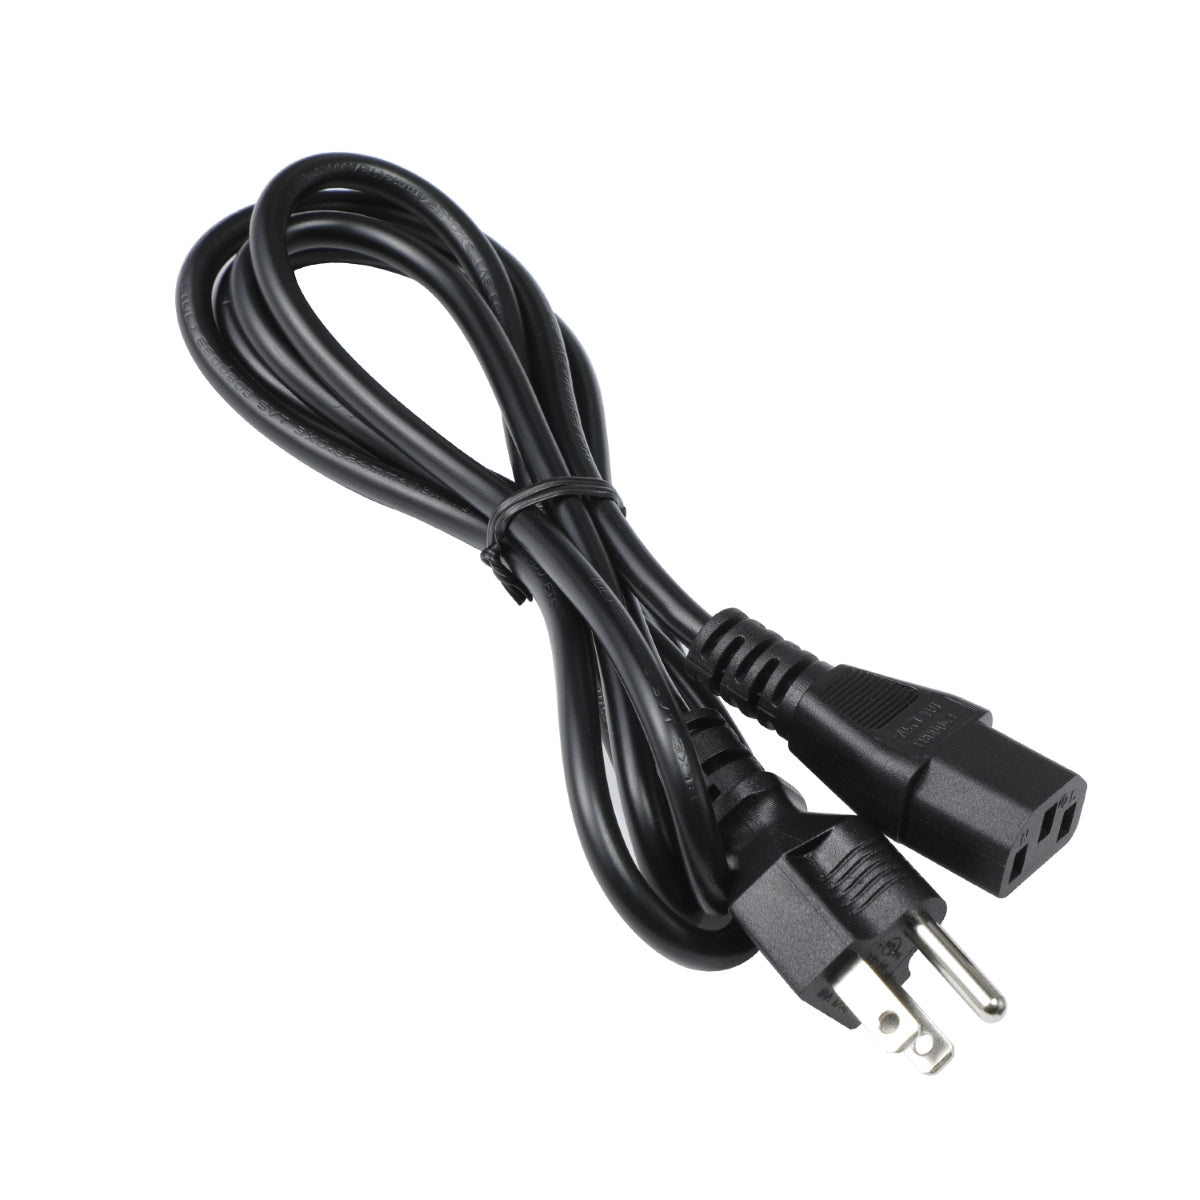 Power Cord for ASUS VS248H-P Monitor.